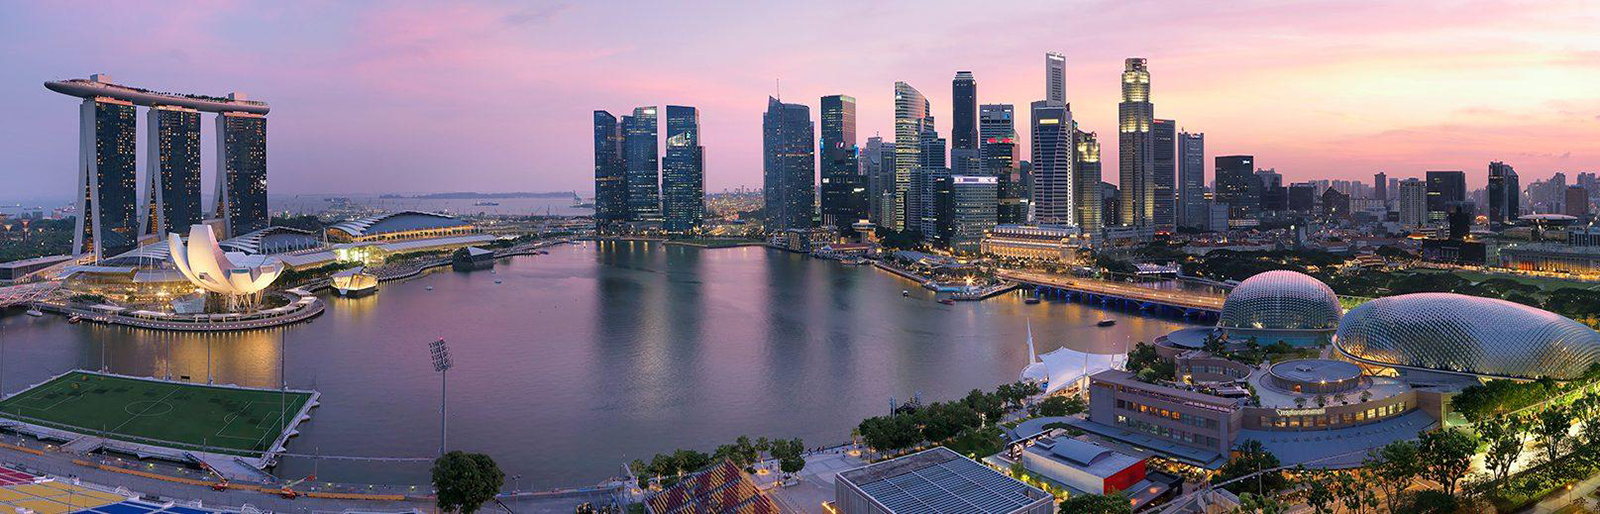 MOST EXPENSIVE CITY TO LIVE IN- The new champion of the world, Singapore has recently beat out Tokyo for the title of "most expensive city" for 2014. Cars can cost between 4-6 times in Singapore what they cost in the US or UK, for example, a Toyota Prius actually costs about 150,000.00 dollars there.